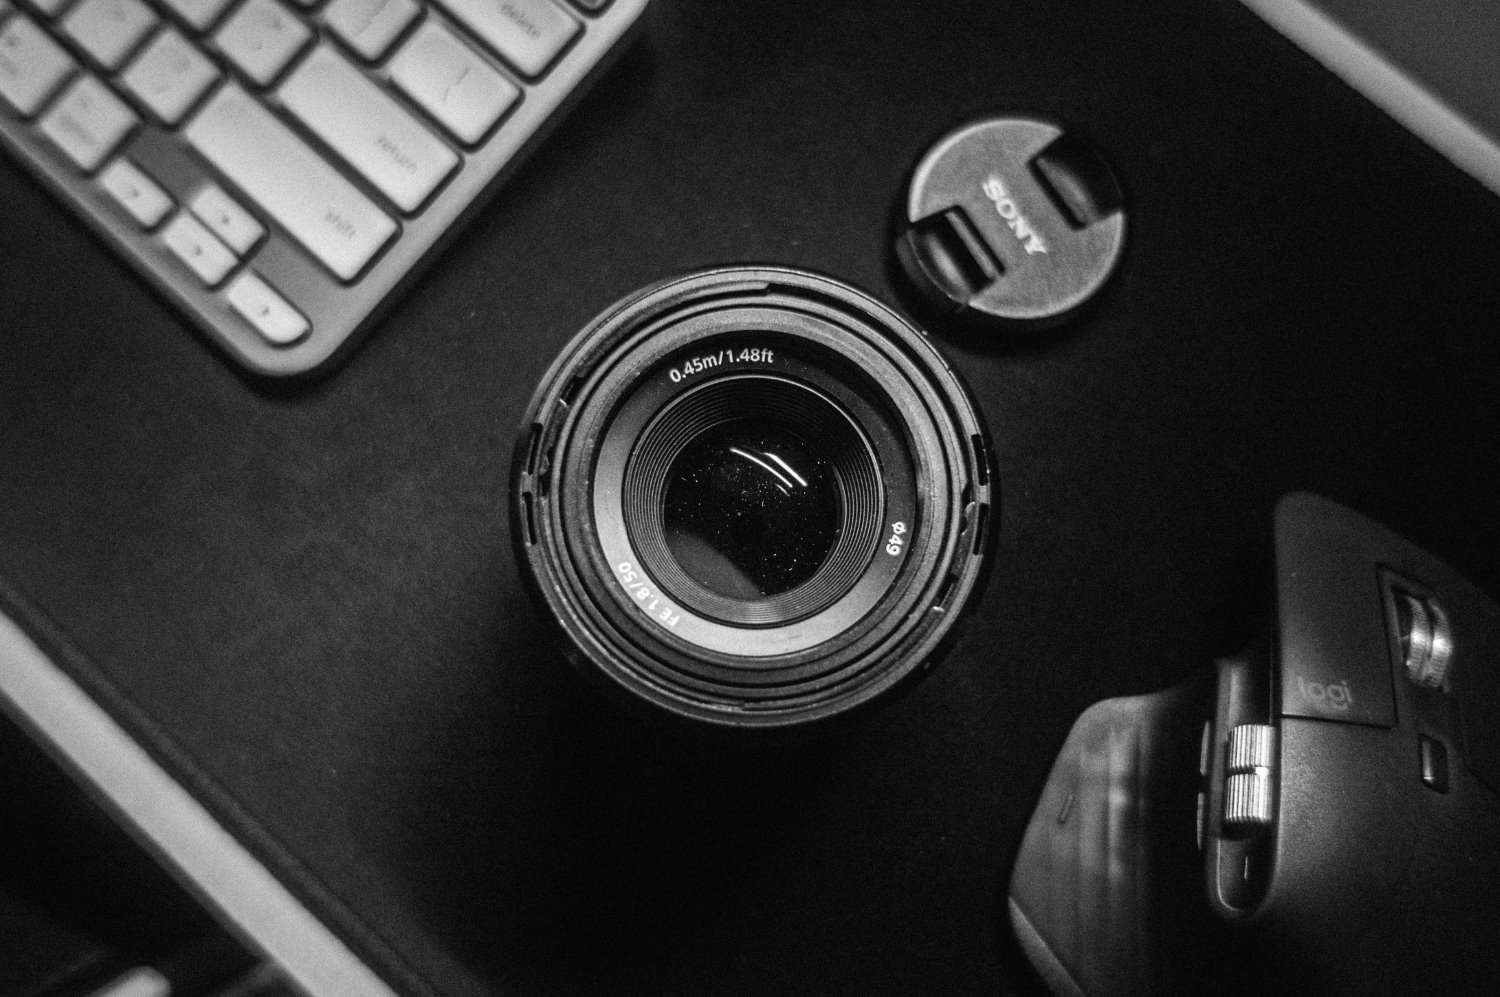 50mm photography and 50mm lenses